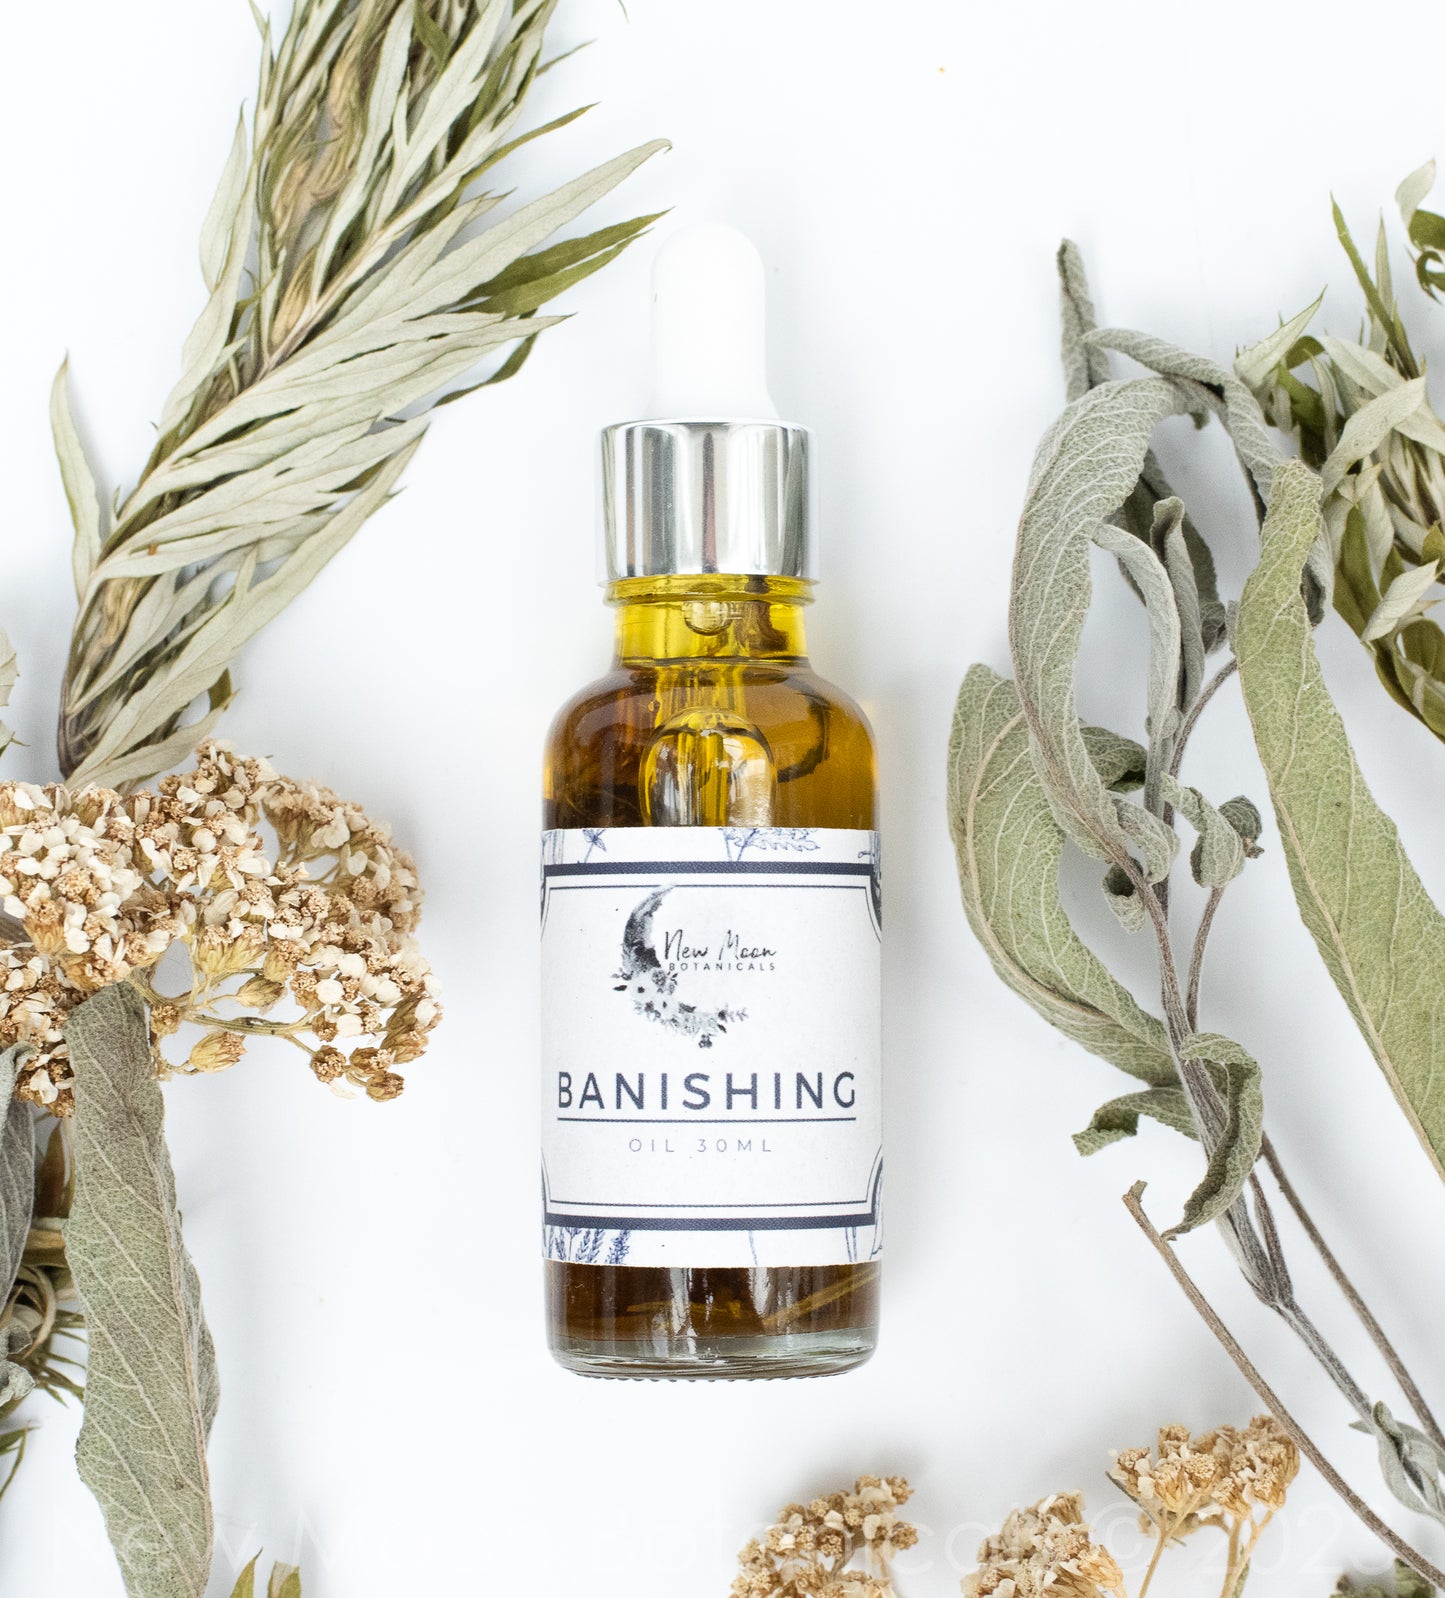 Banishing Oil with Botanicals & Essential Oils.